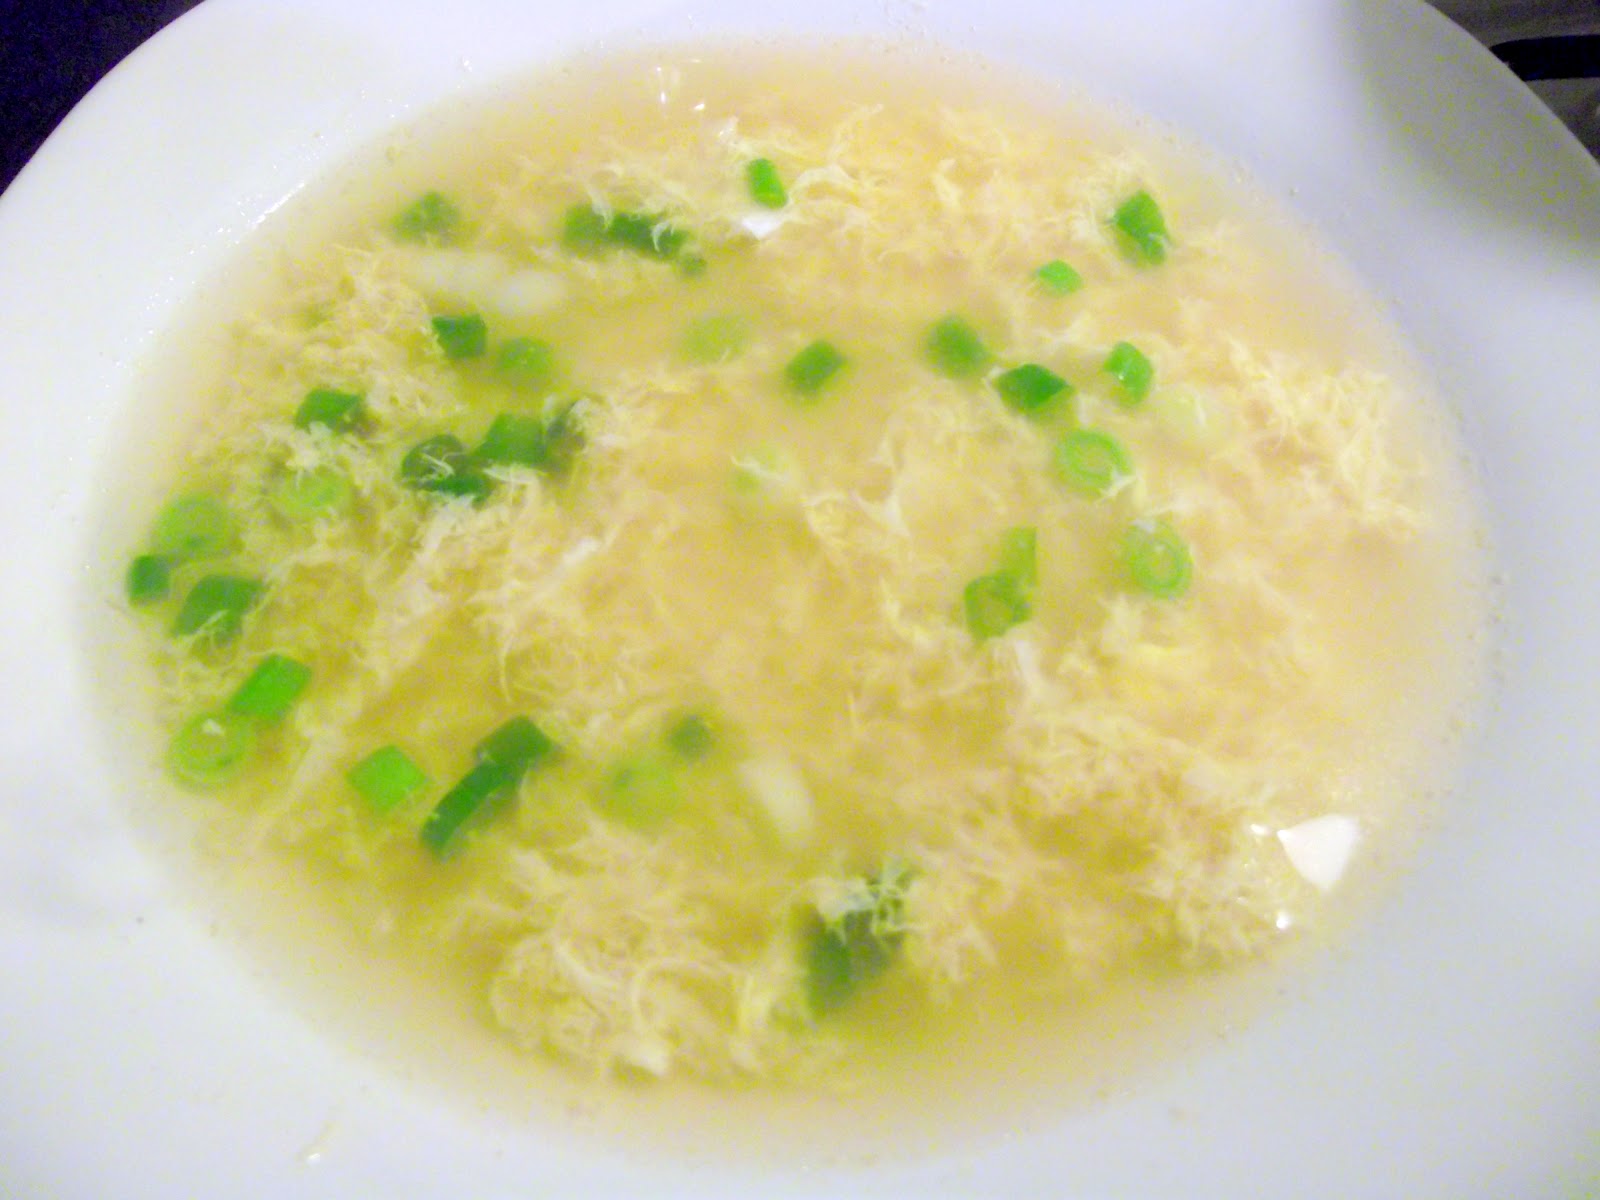 A View at Five-Two: Egg Drop Soup - Broke Food